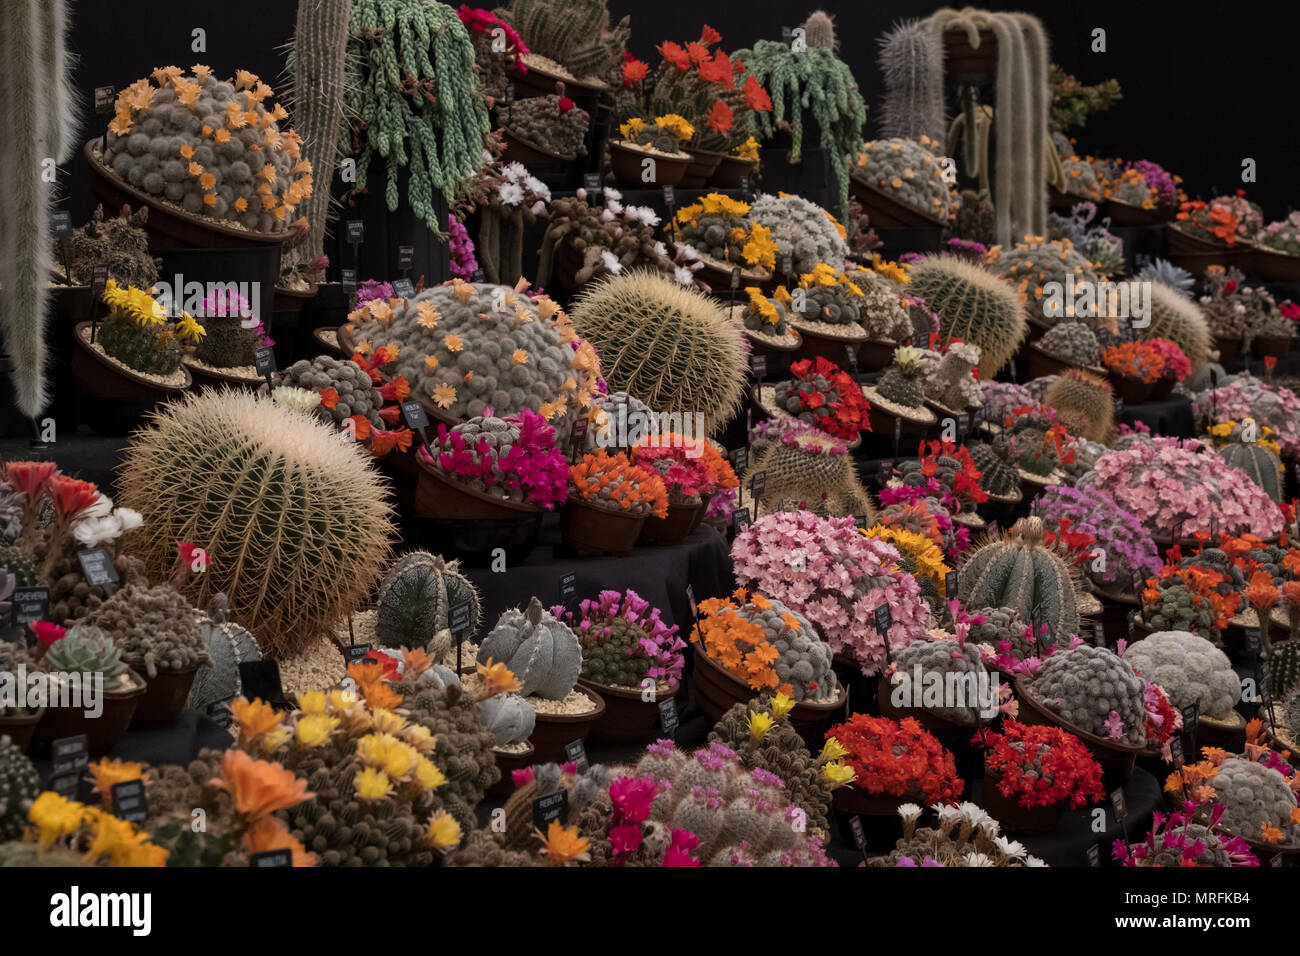 Display of colourful flowering cactus plants against a black background, seen at the Royal Horticultural Society Chelsea Flower Show, London UK 2018. Stock Photo